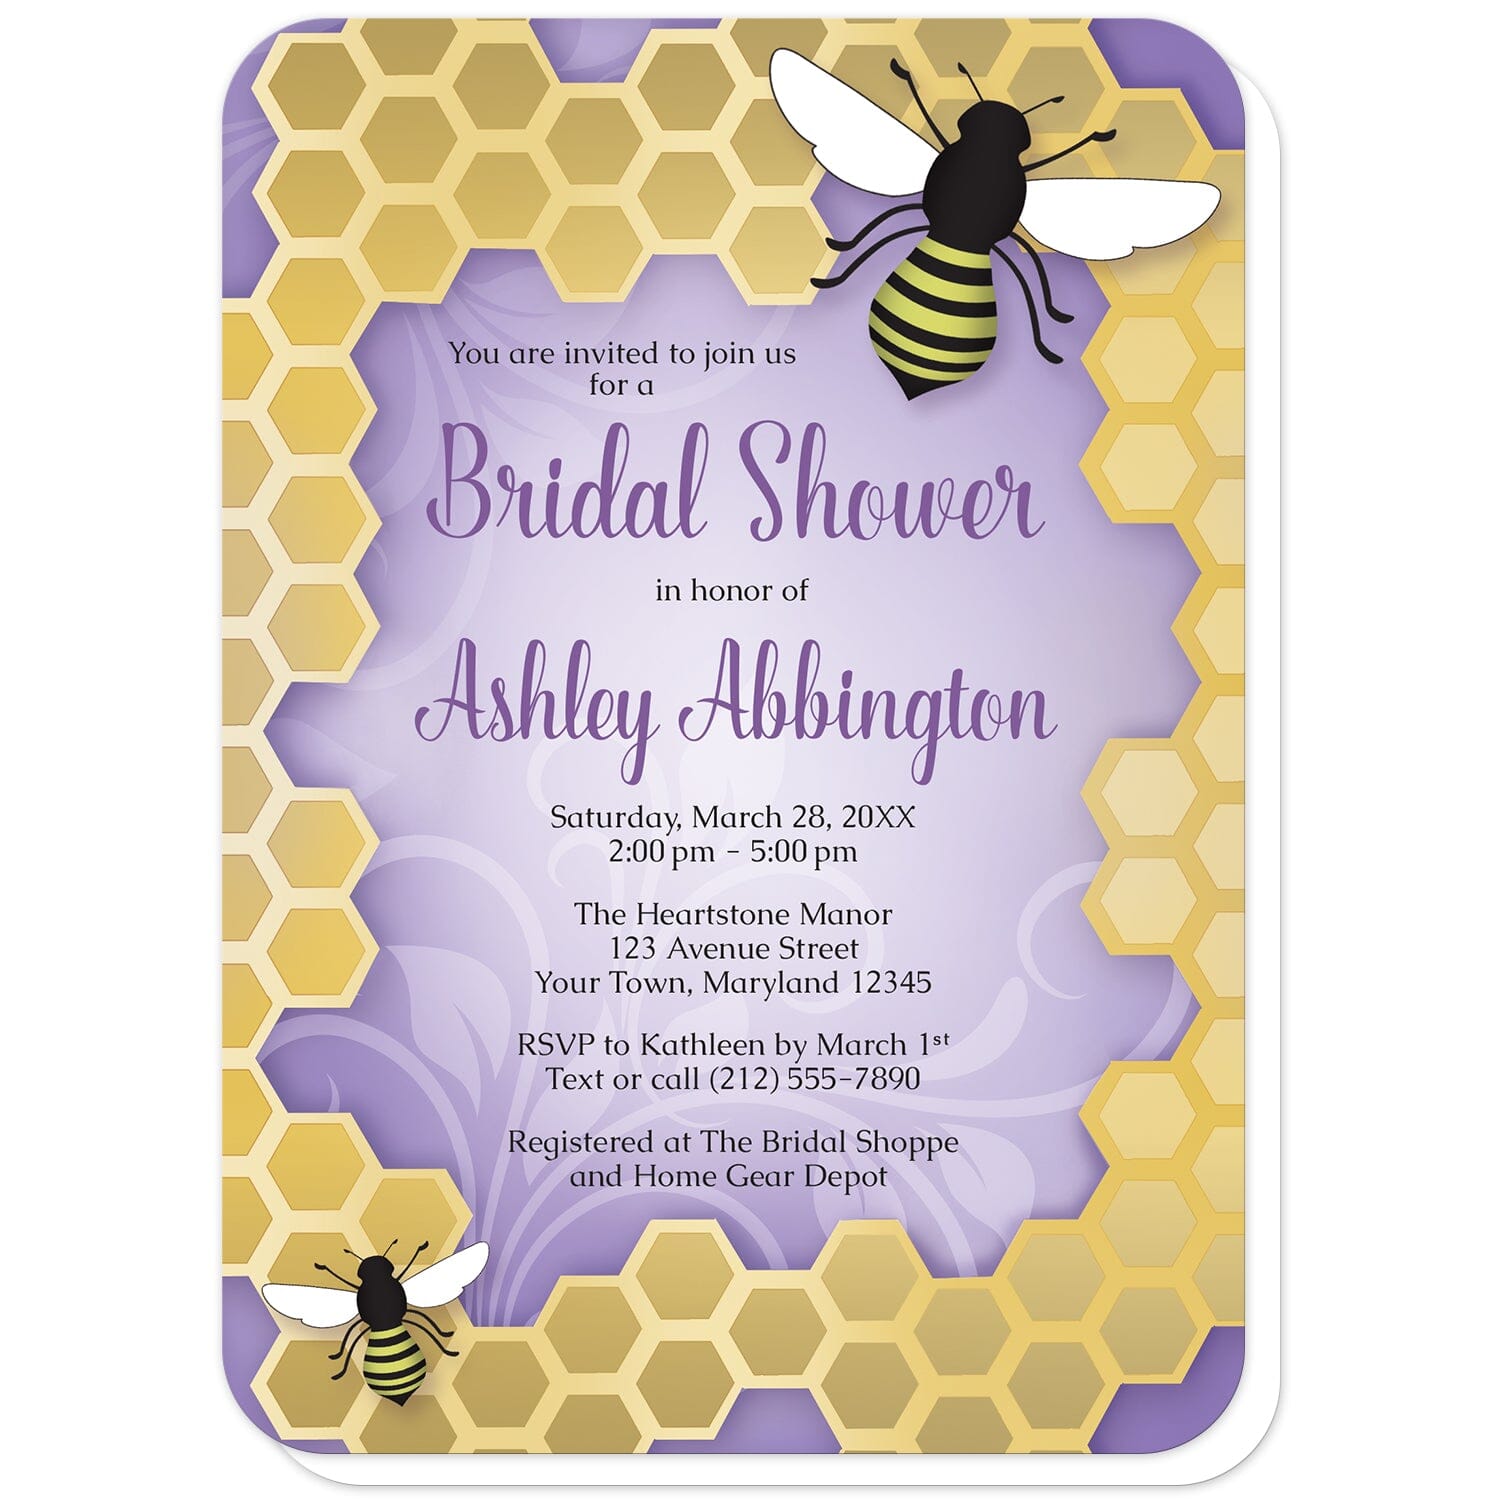 Purple Honeycomb Bee Bridal Shower Invitations (with rounded corners) at Artistically Invited. Purple honeycomb bee bridal shower invitations designed with an illustration of two bees on a golden honeycomb frame design around the invitation over a purple flourish background color. Your personalized bridal shower celebration details are custom printed in black and purple in the middle over the purple background design.